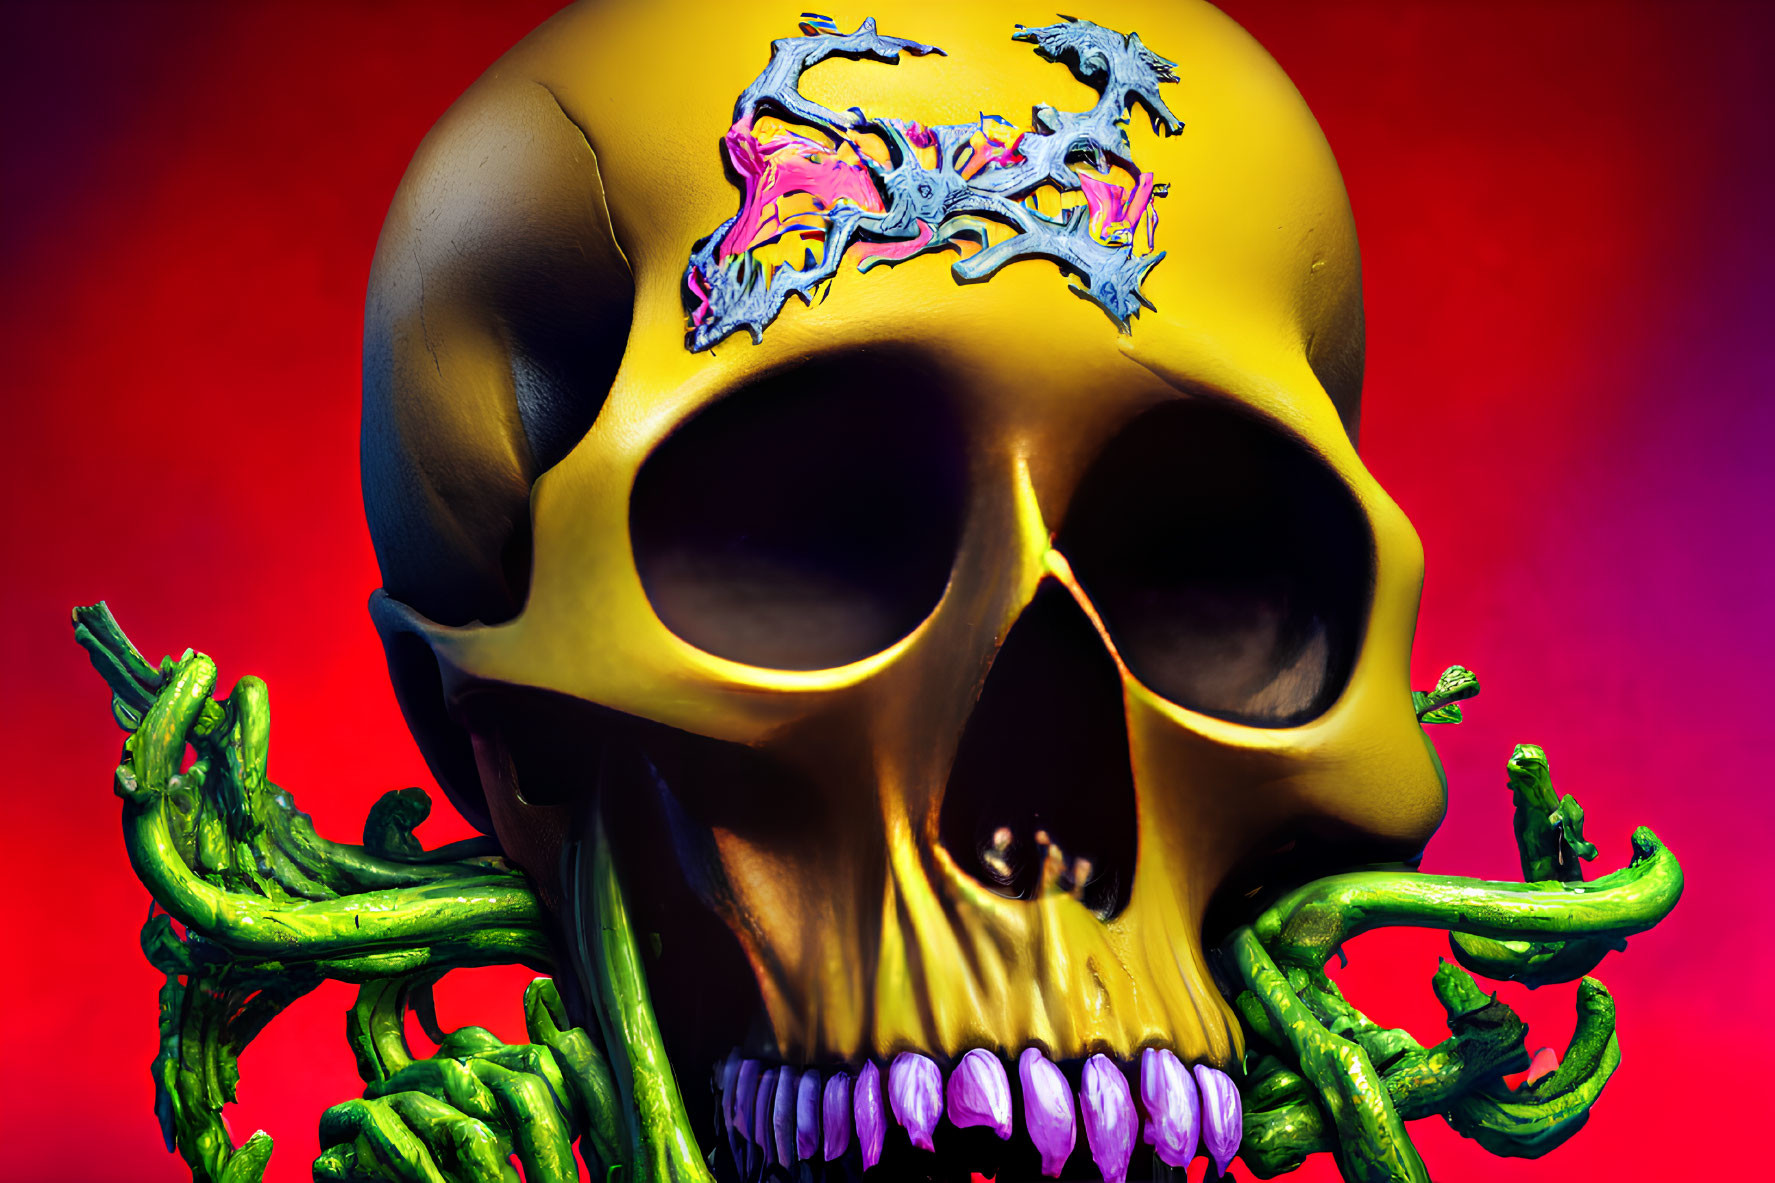 Vibrant skull art with gold, neon green tentacles, pink & blue dragon motif